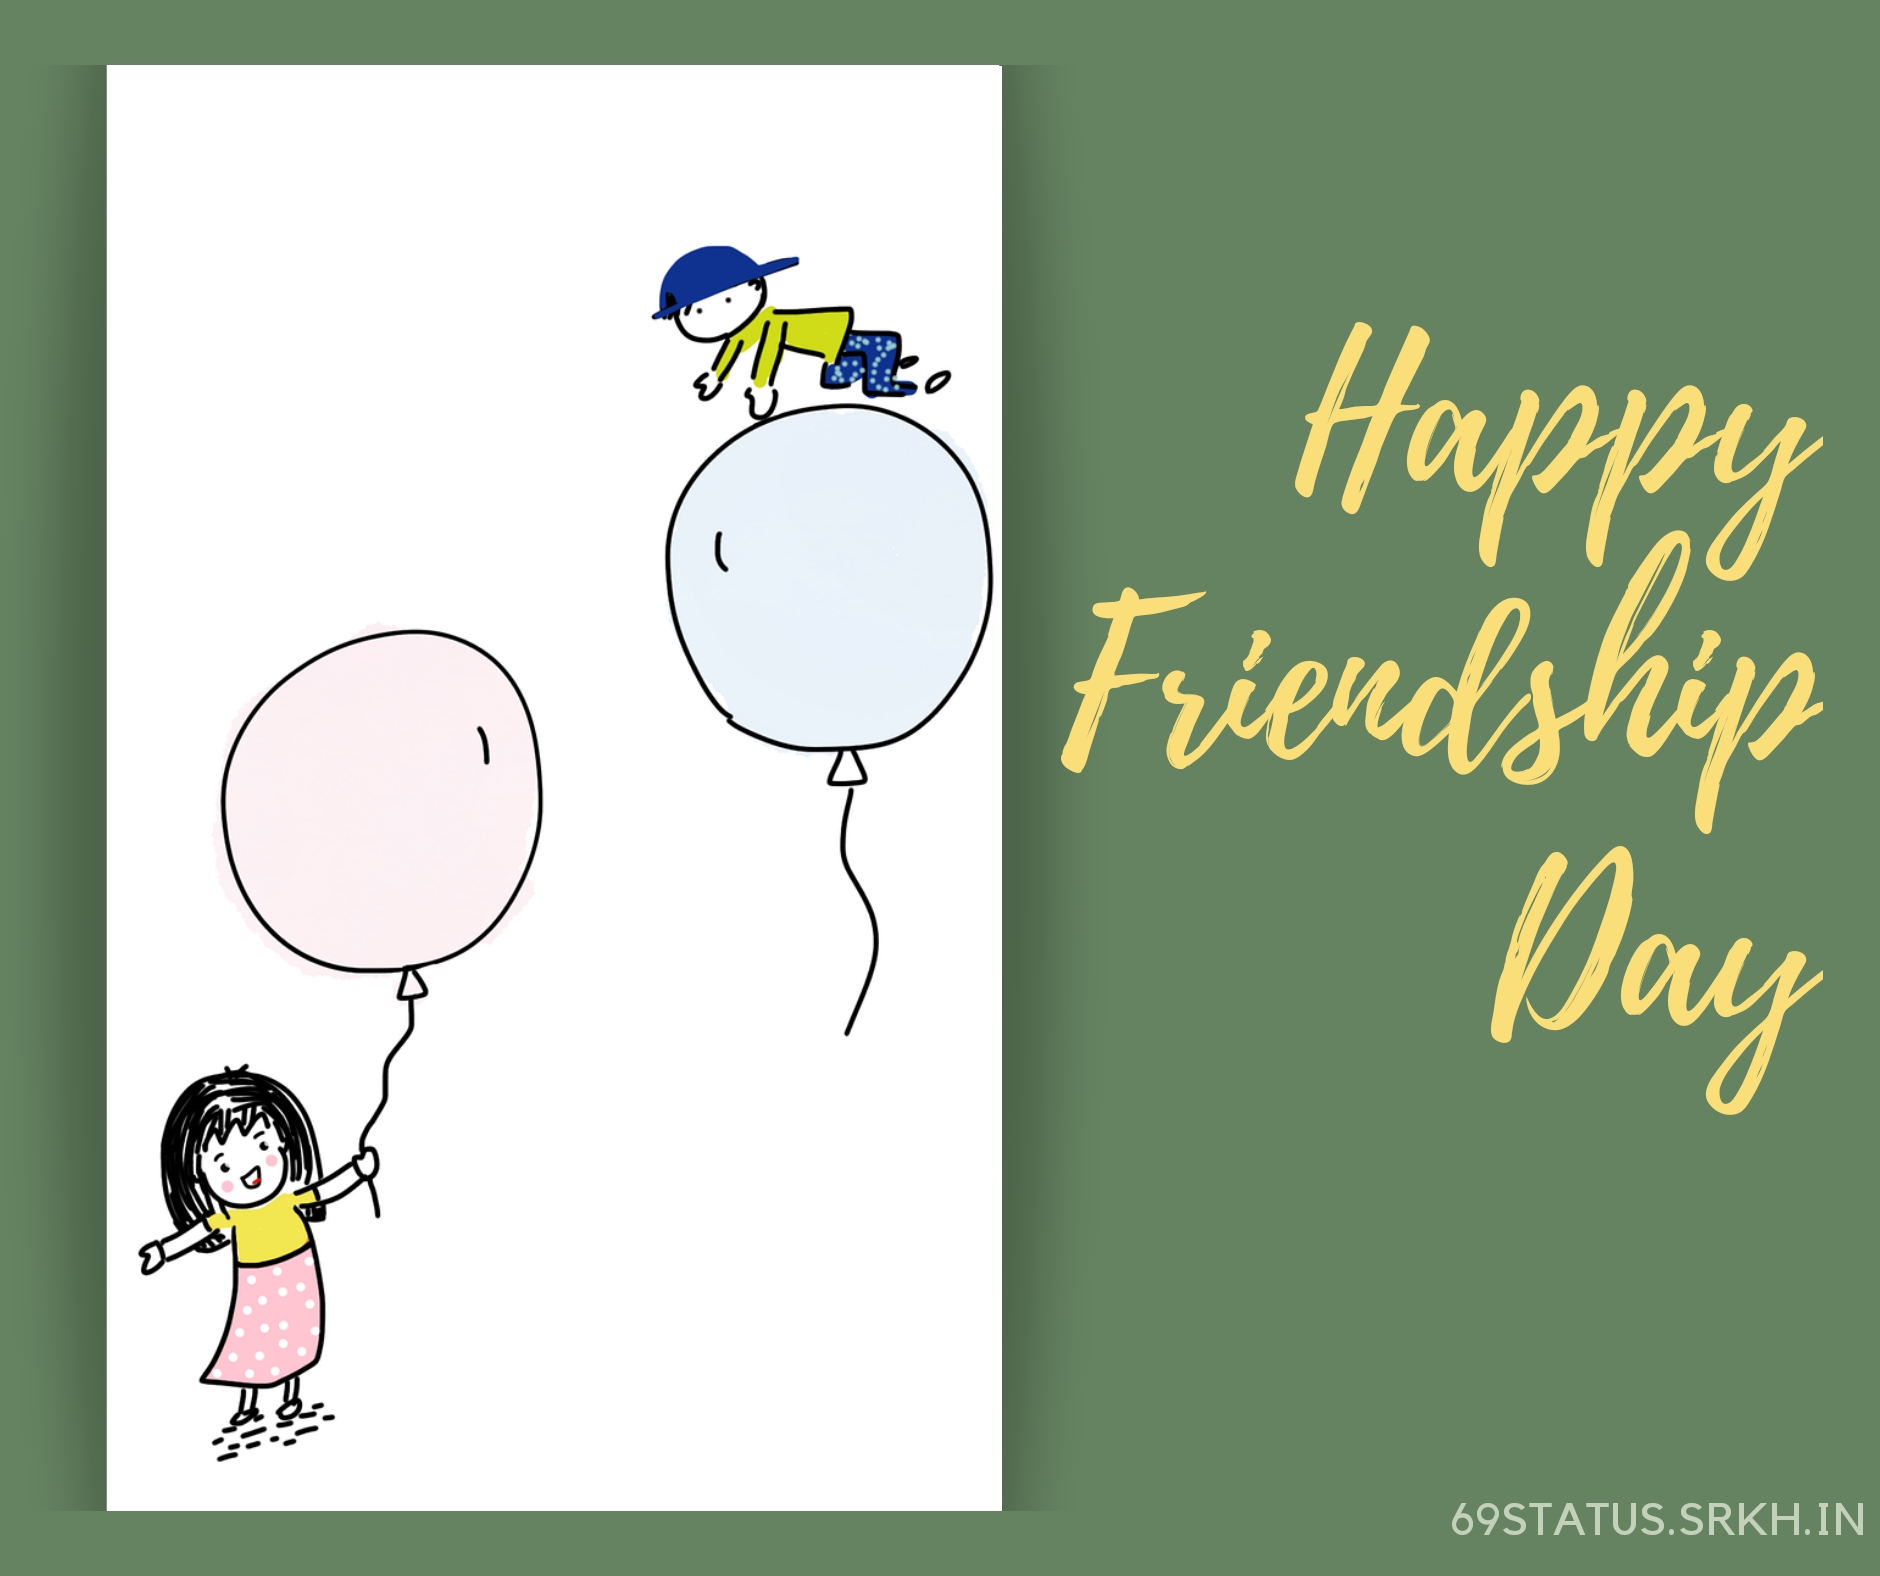 Creative Friendship Day Images